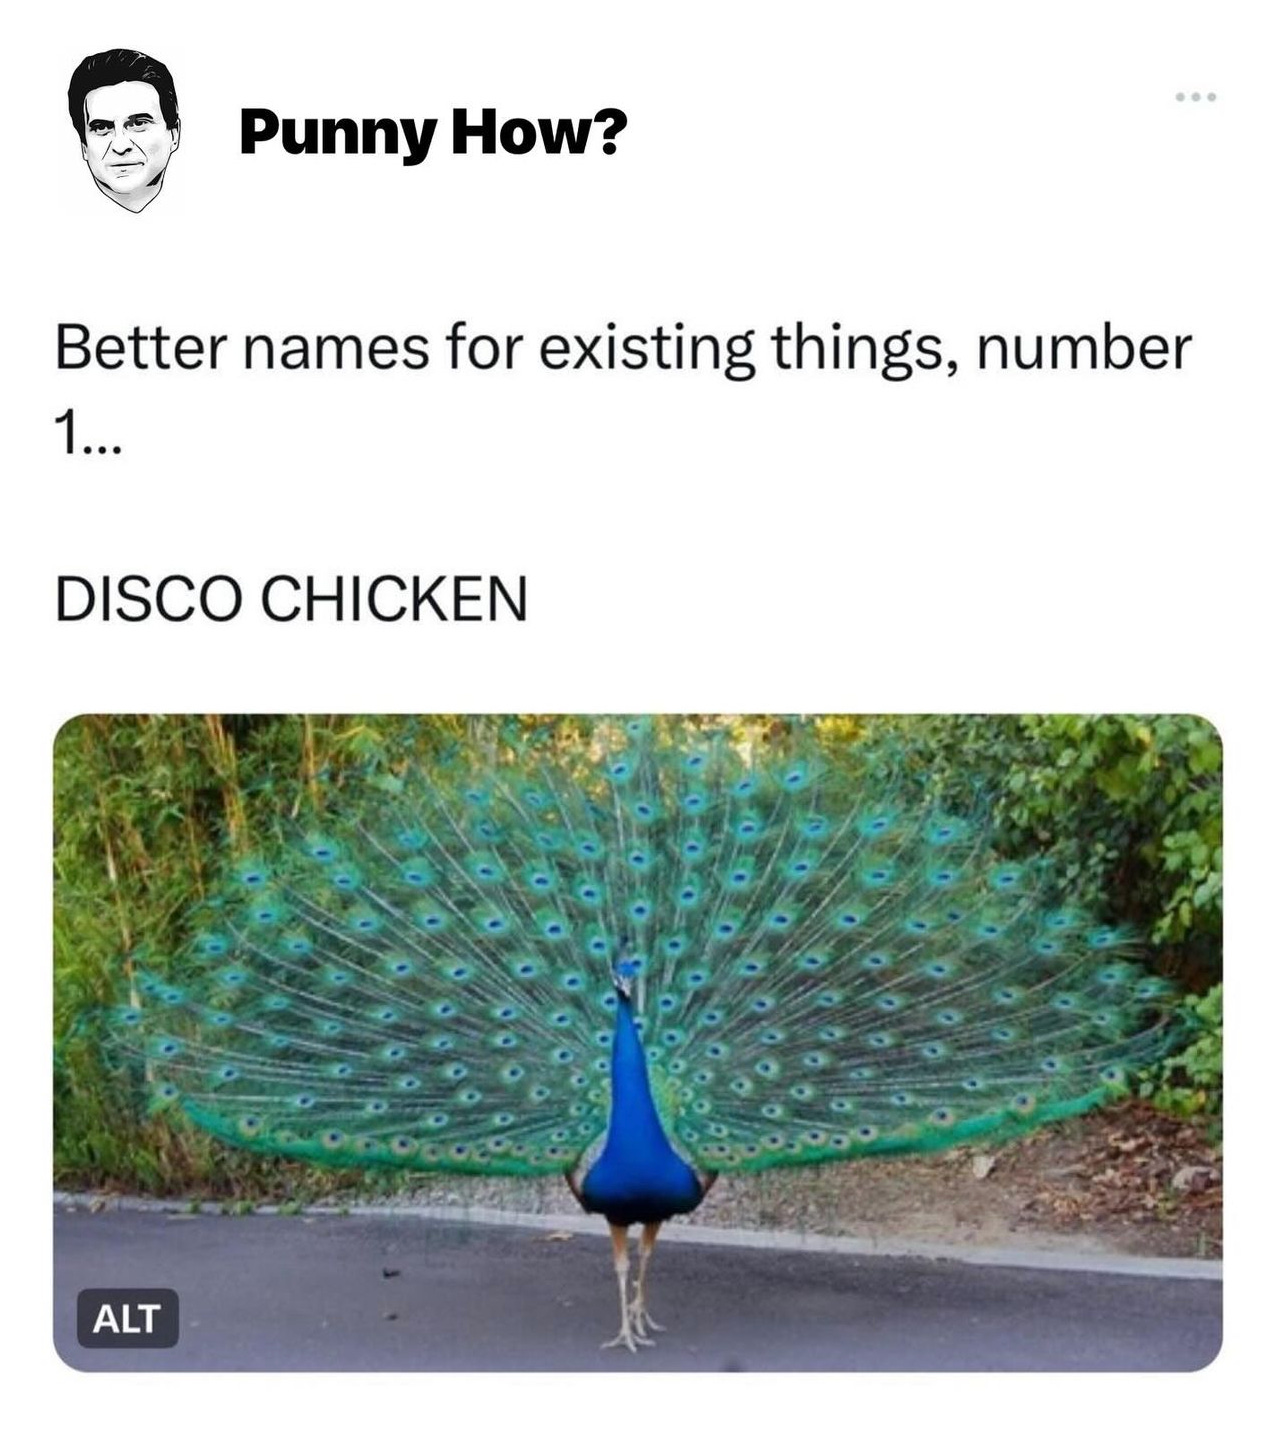 A peacock with feathers spread, captioned "Better names for animals number 1...DISCO CHICKEN"